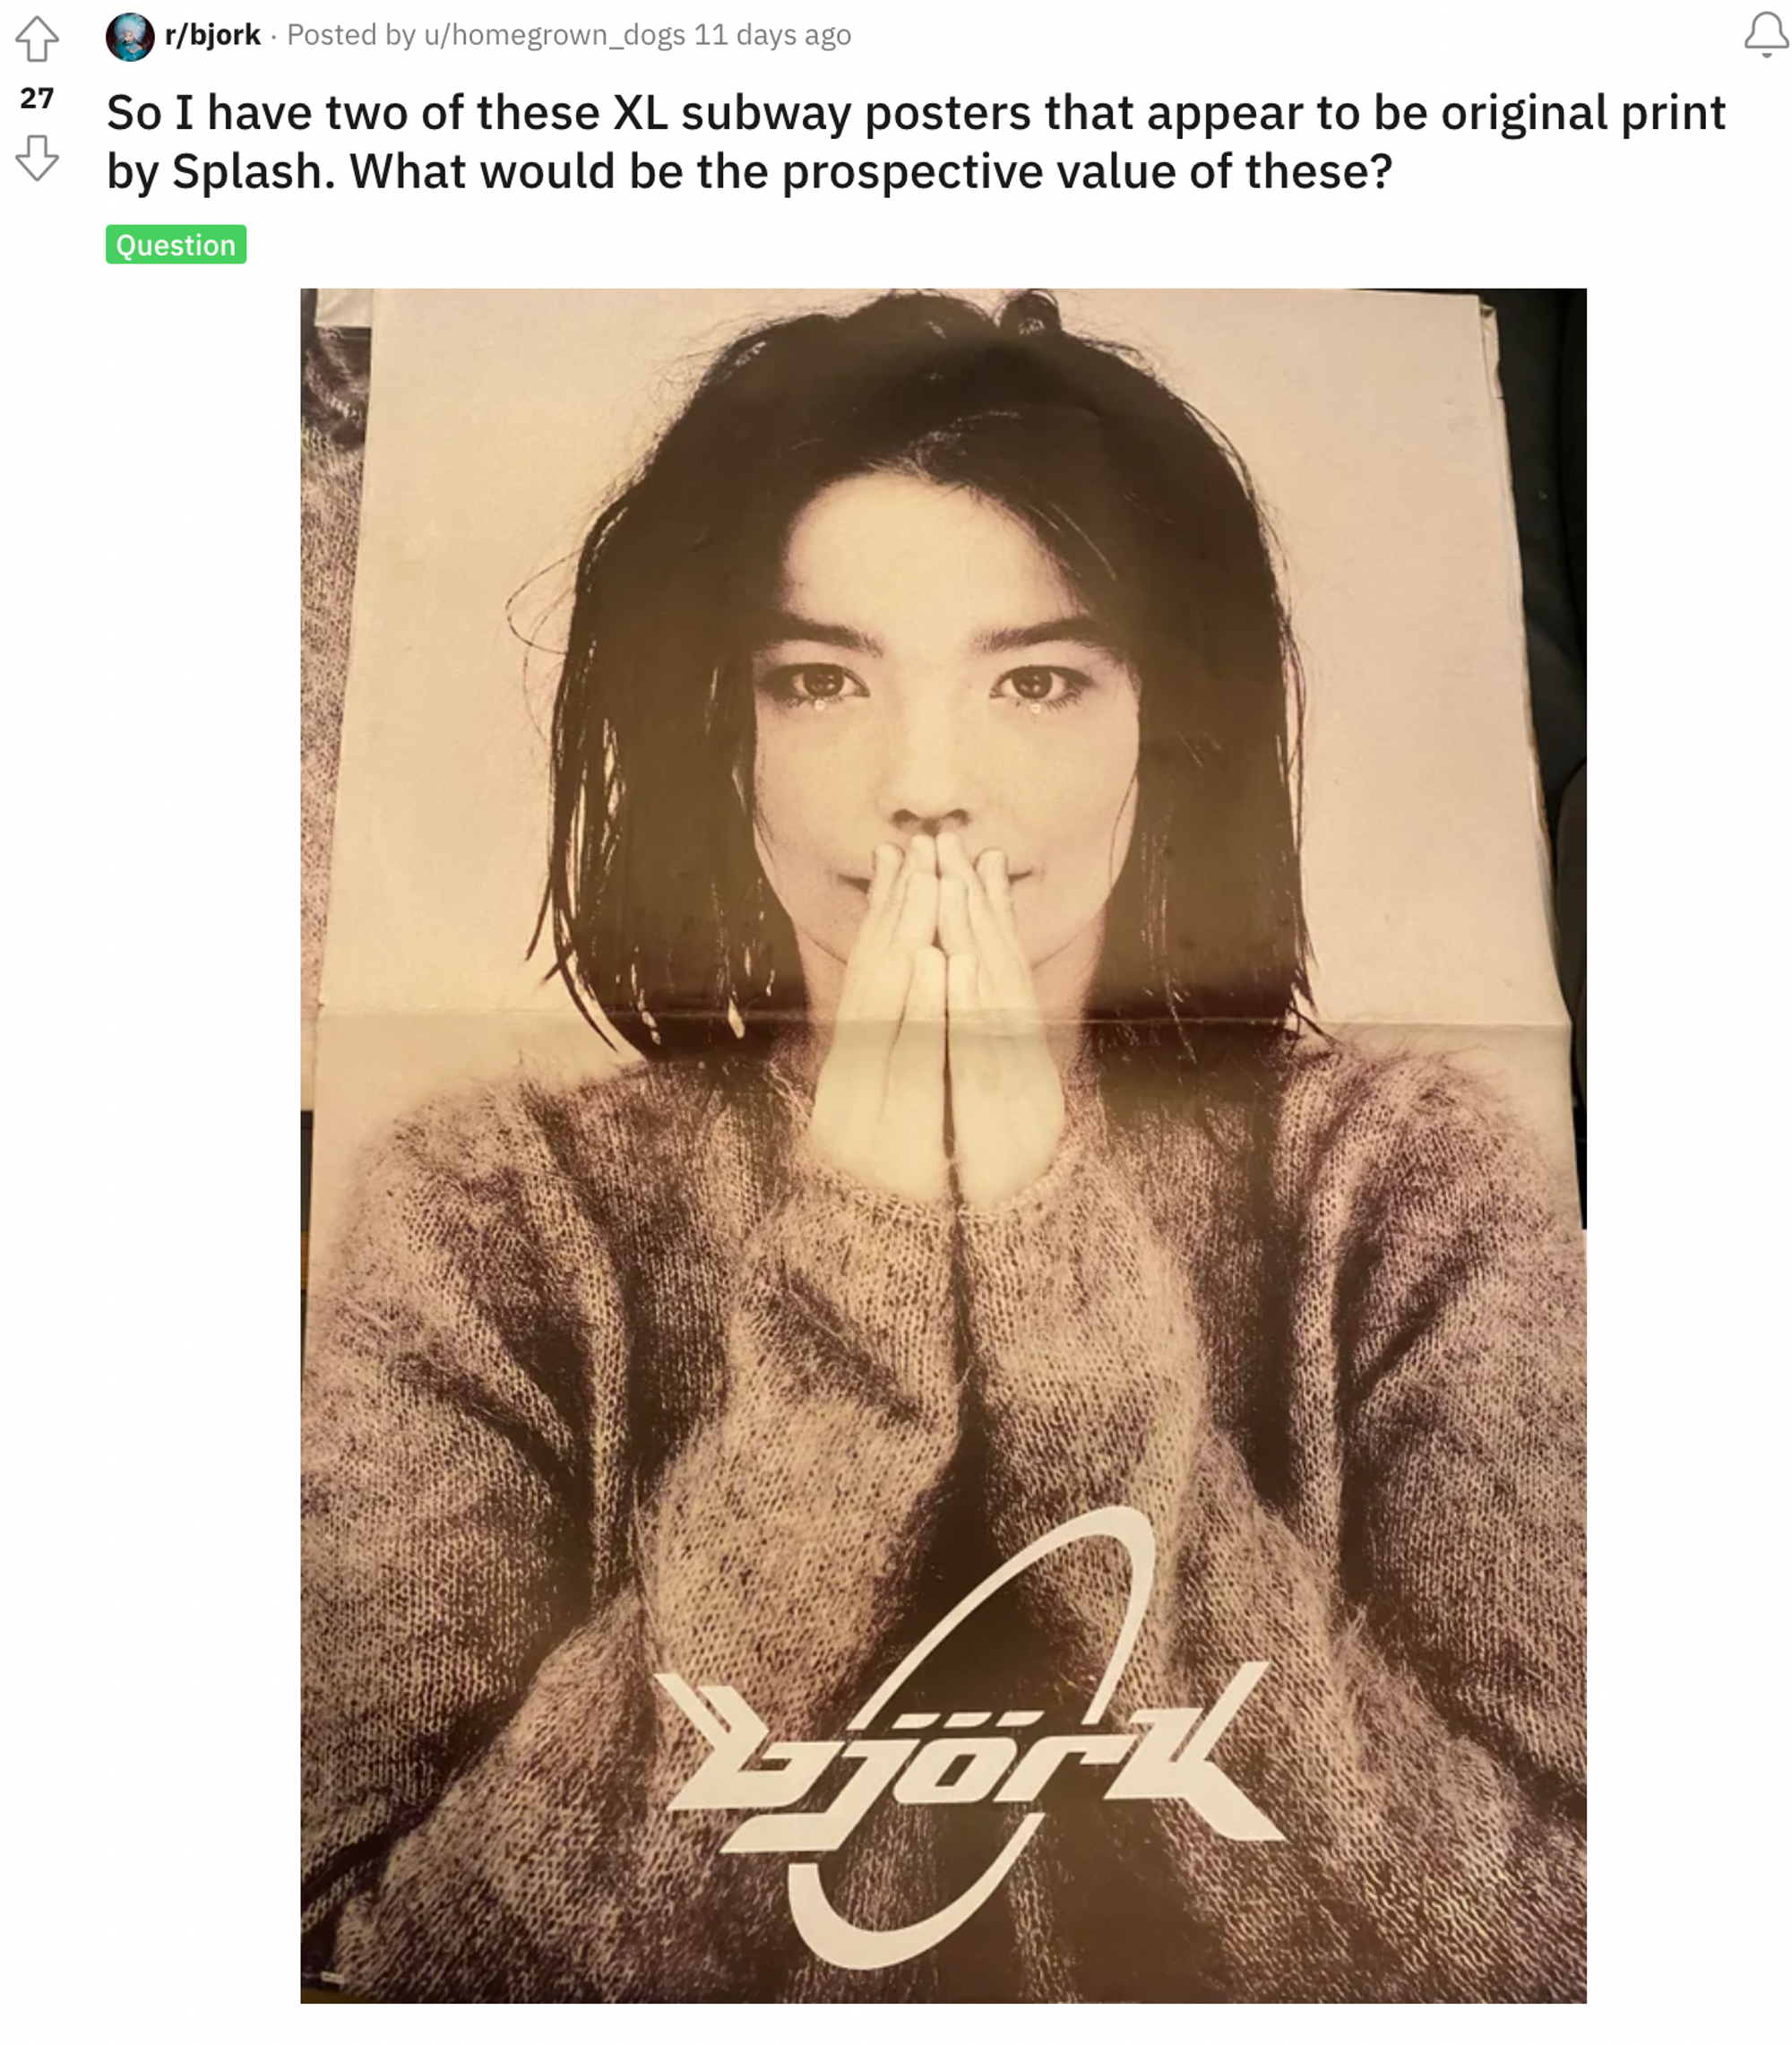 Reddit post about Björk XL subway posters